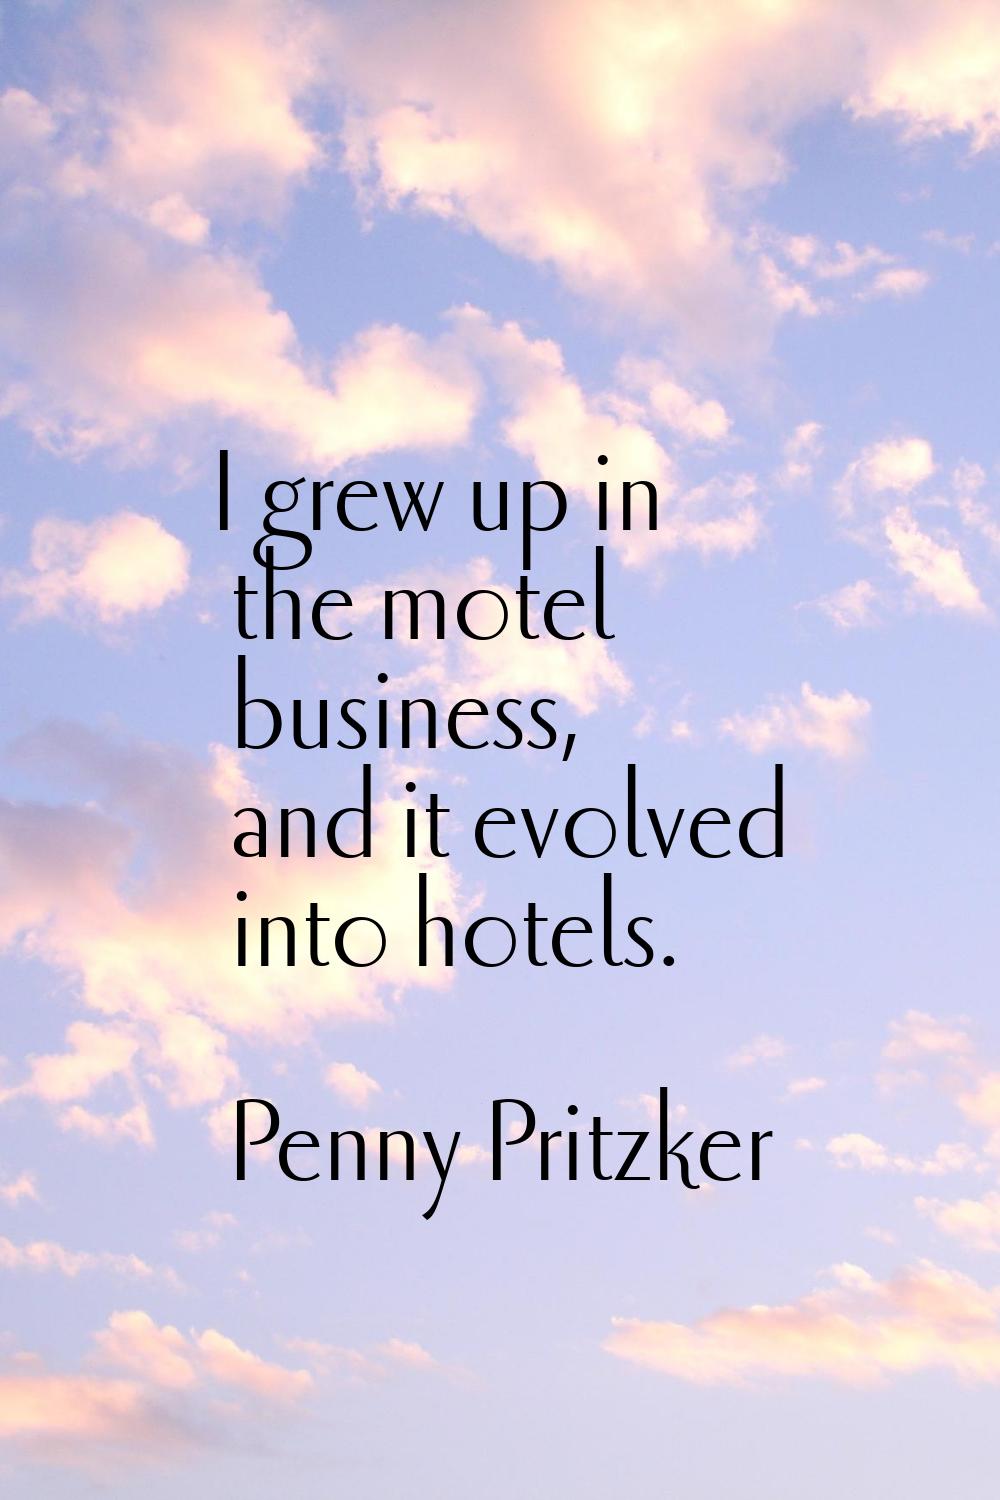 I grew up in the motel business, and it evolved into hotels.